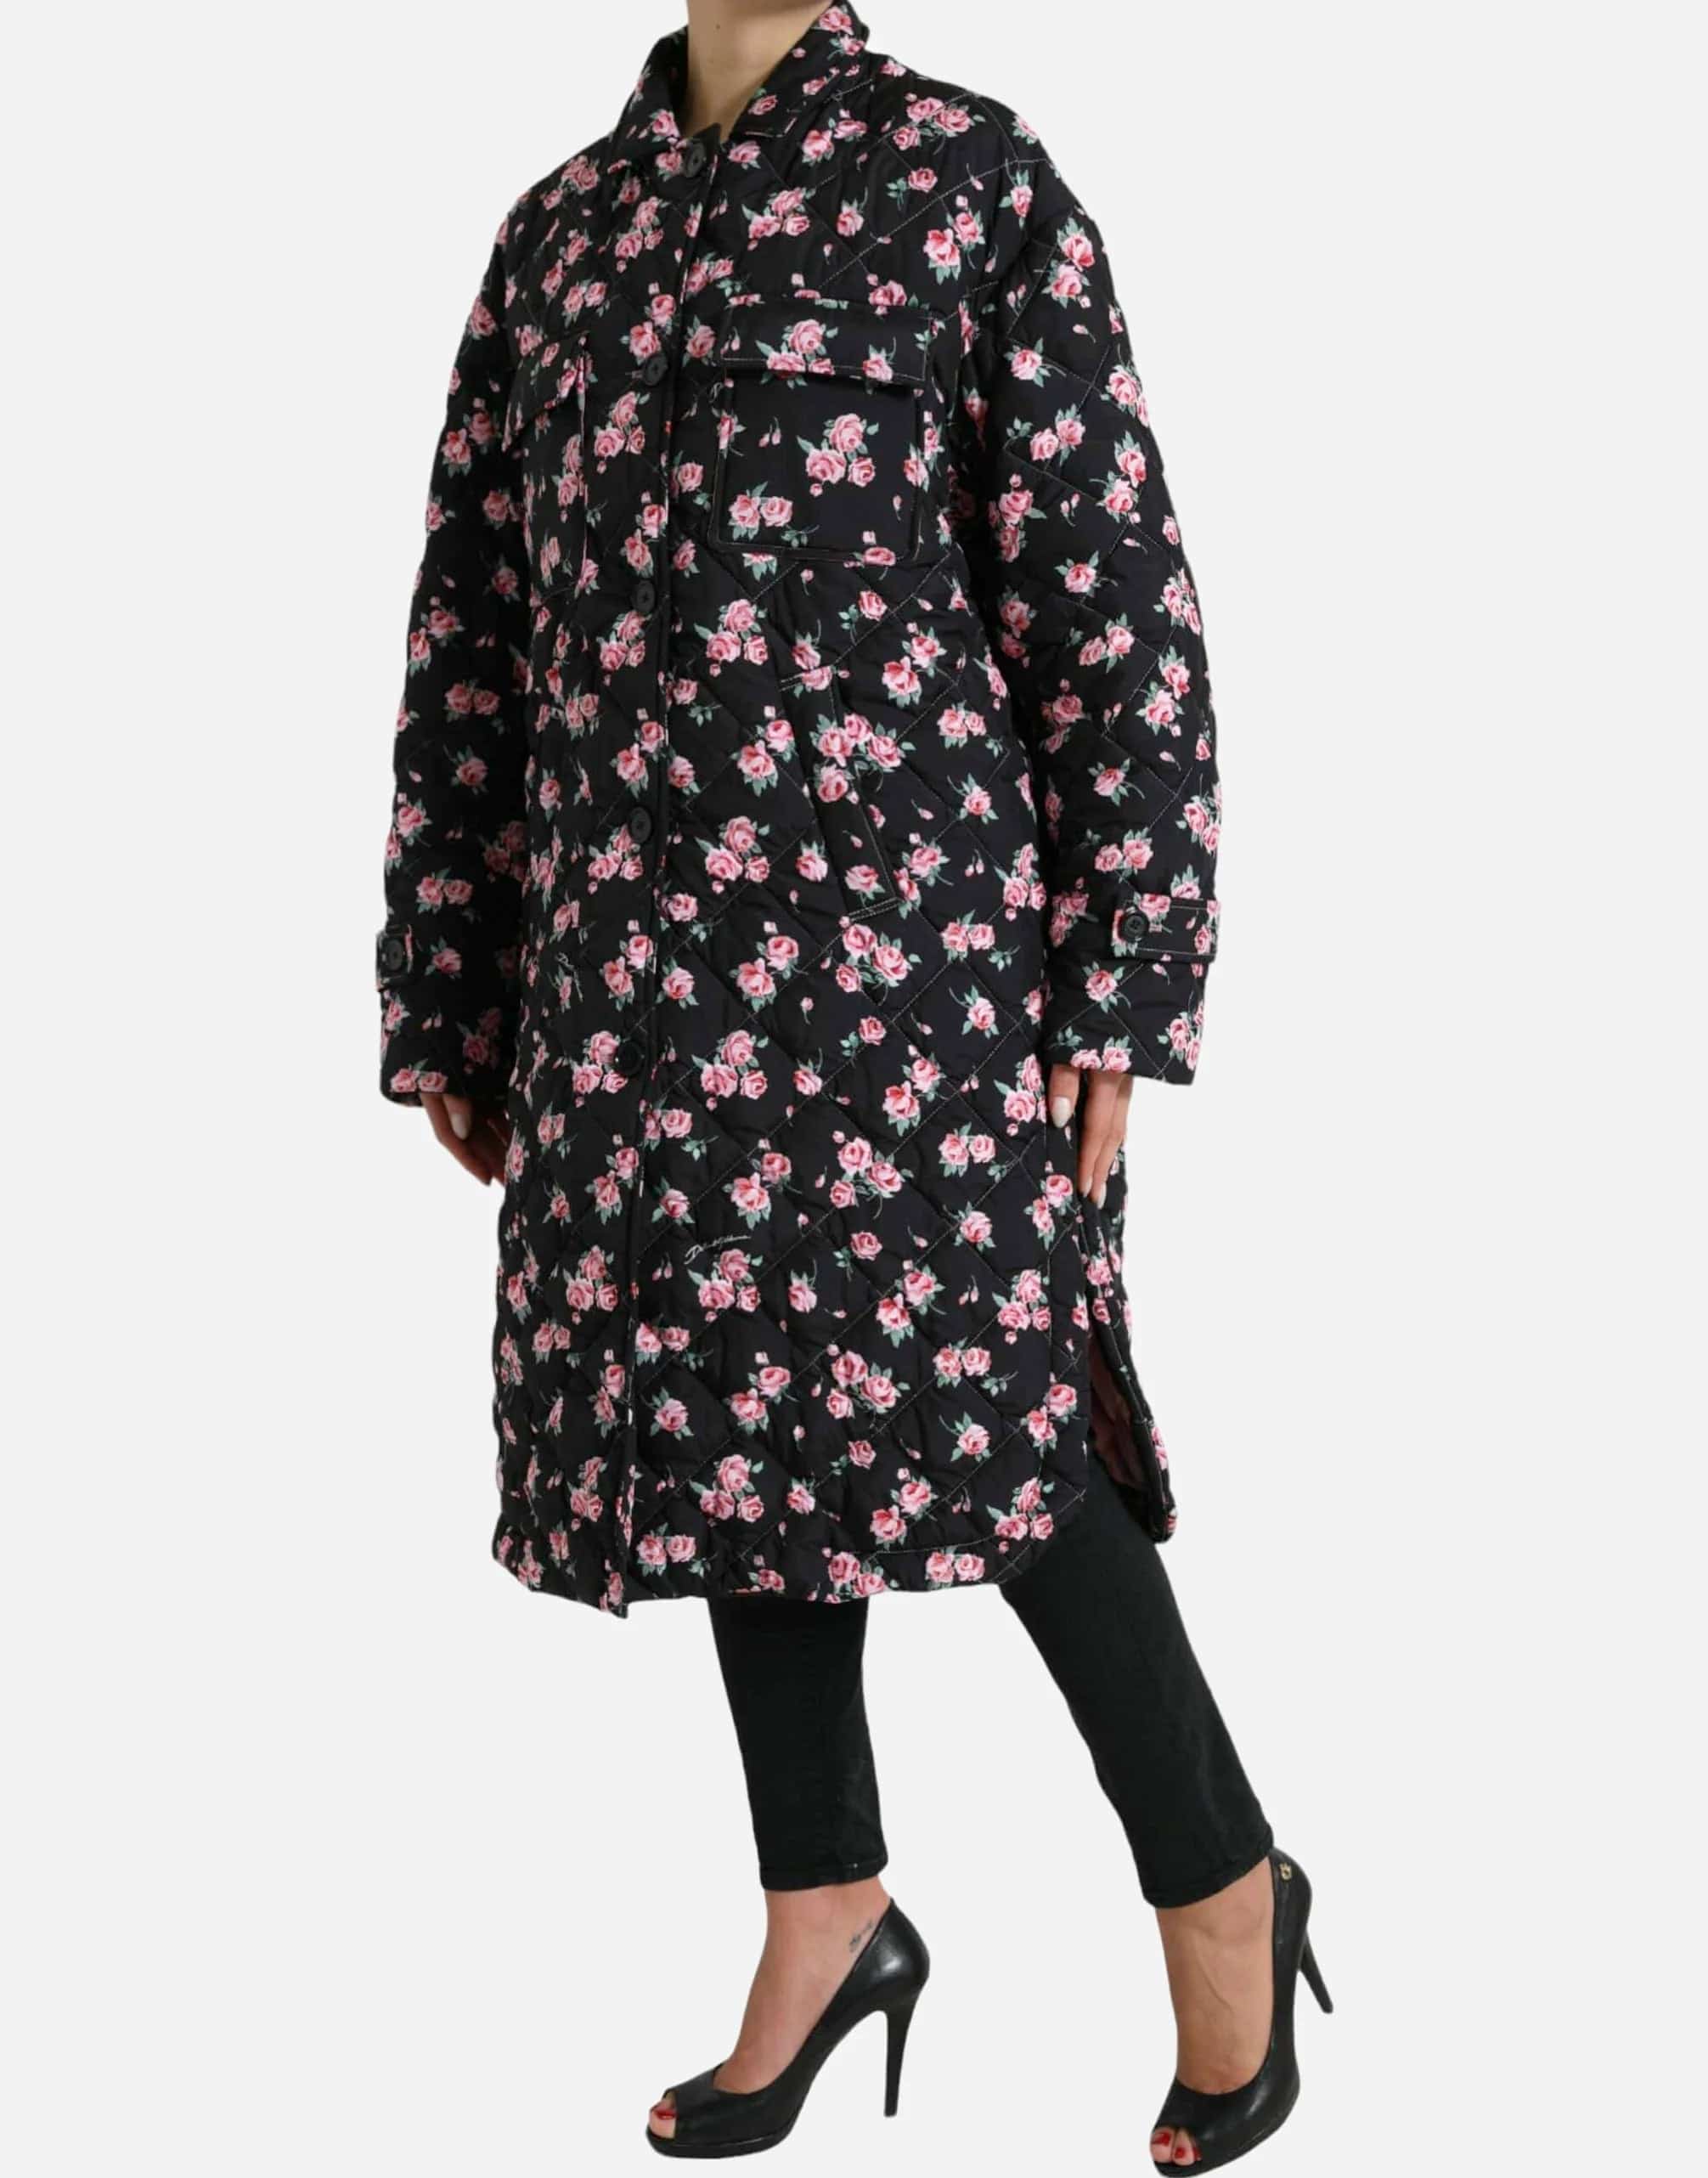 Dolce & Gabbana Floral-Print Collared Trench Coat